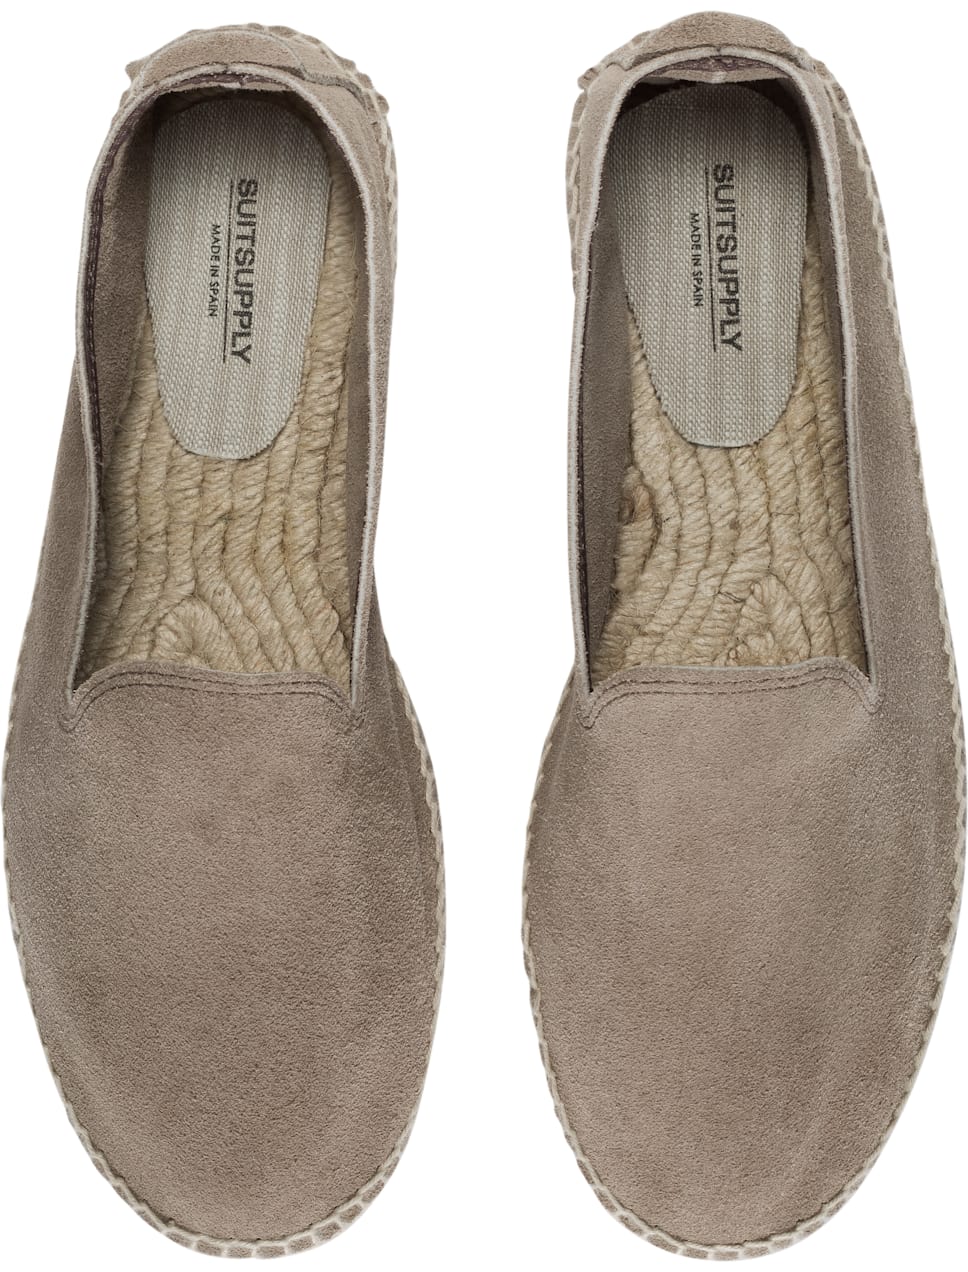 Light Brown Espadrilles Fw171271 | Suitsupply Online Store